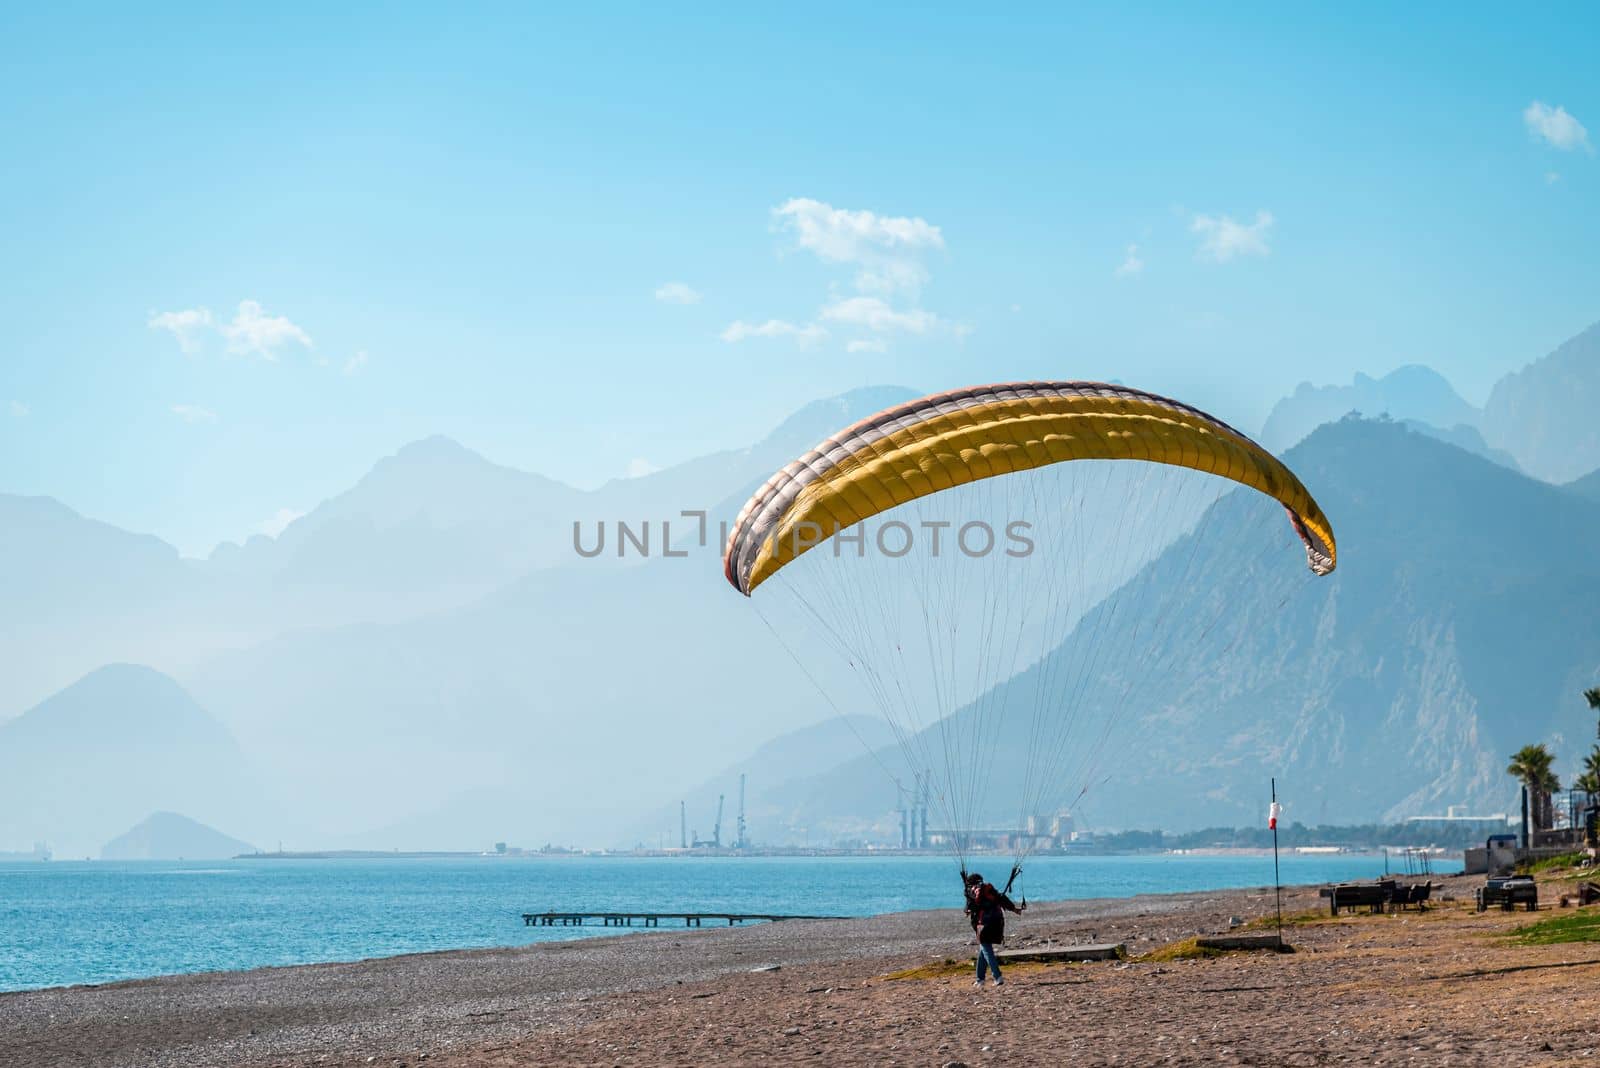 Man practicing paragliding on a windy day on the beach by the sea by Sonat